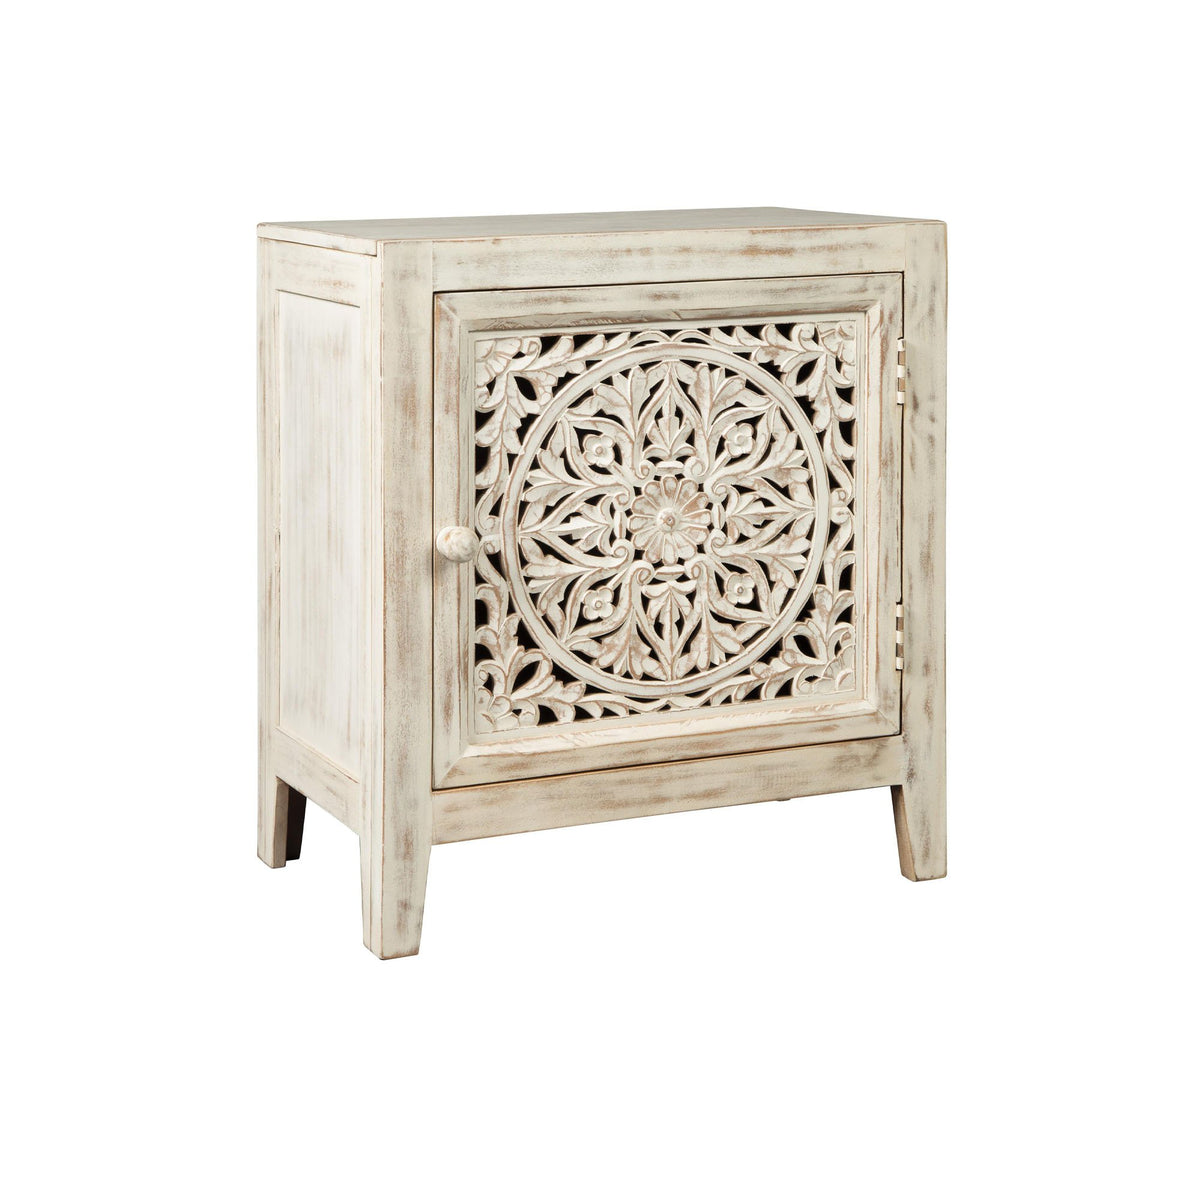 Wooden Accent Cabinet with Single Door, Antique White - BM207017